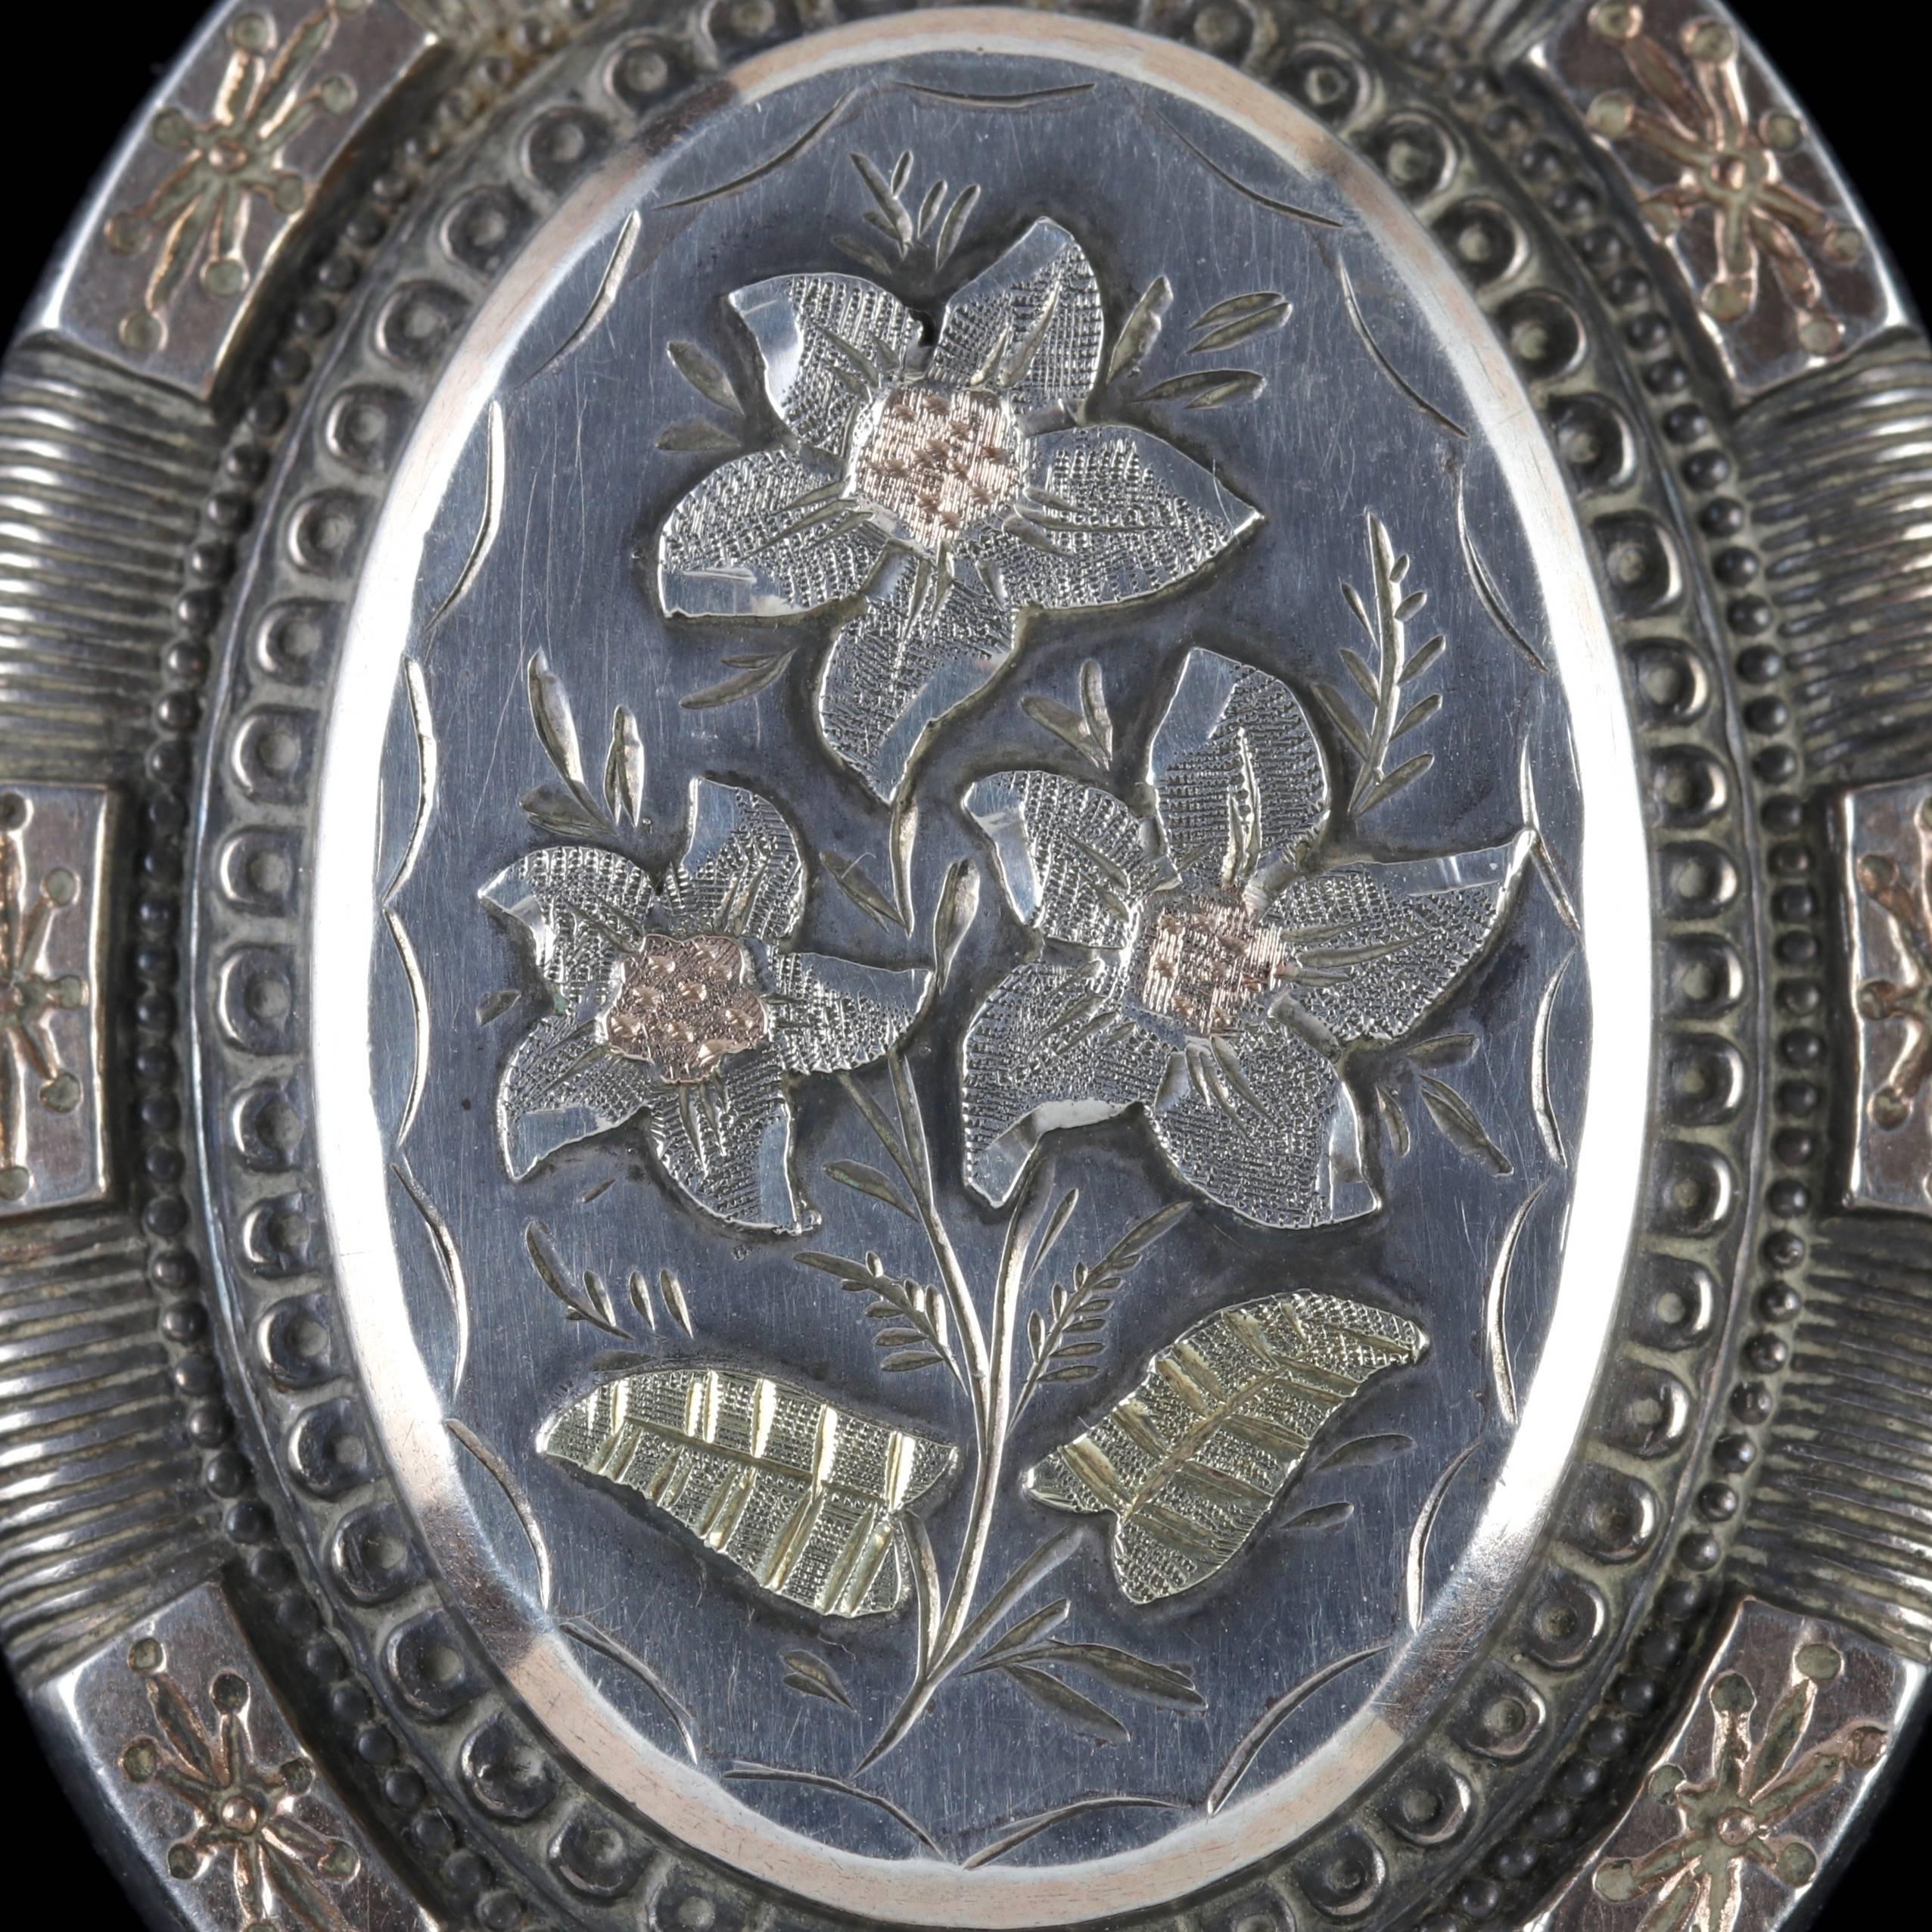 To read more please click continue reading below-

This beautiful antique Victorian Gold and Sterling Silver Forget me not locket is Circa 1900. 

The wonderful locket is beautifully engraved and boasts a fabulous centre piece of Gold Forget me